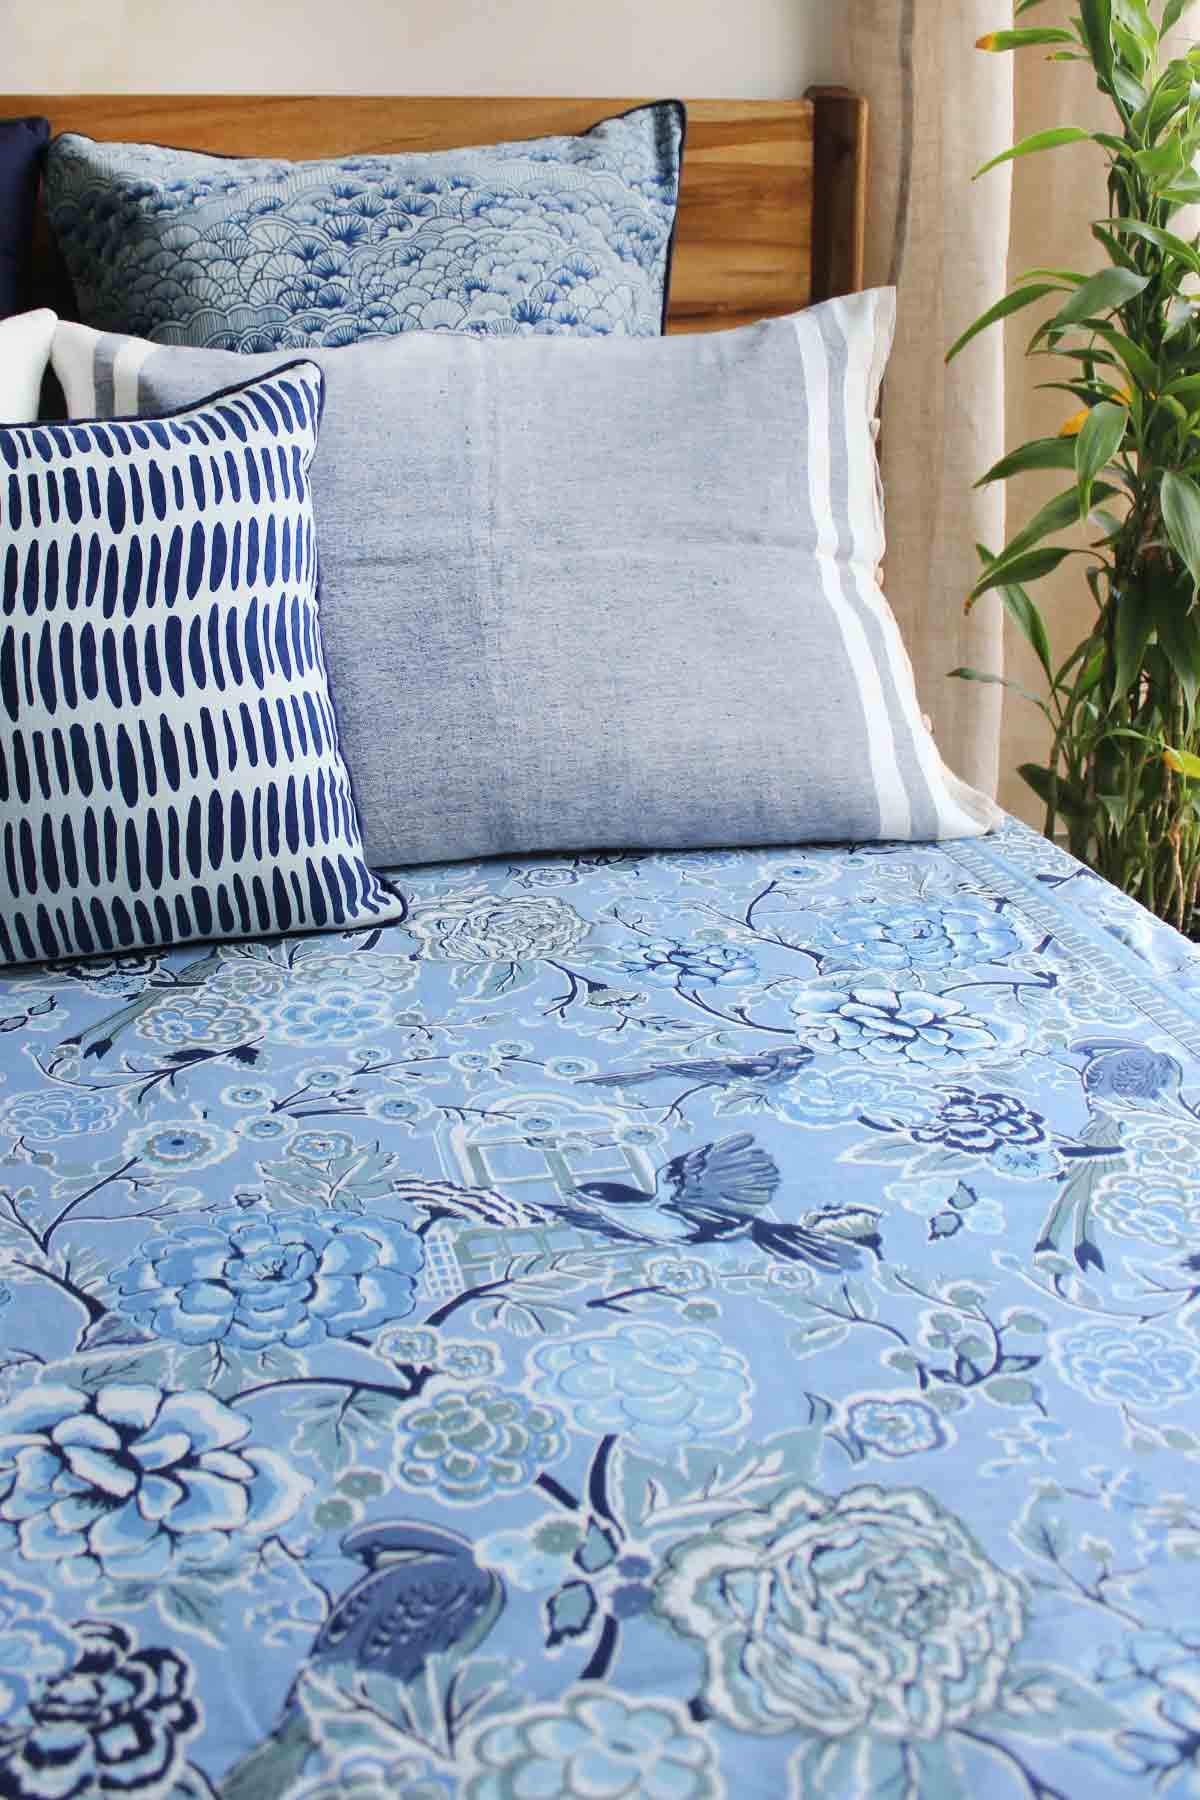 Bedding Sets: Buy Bed Covers & Pillow Covers Online - Freedom Tree